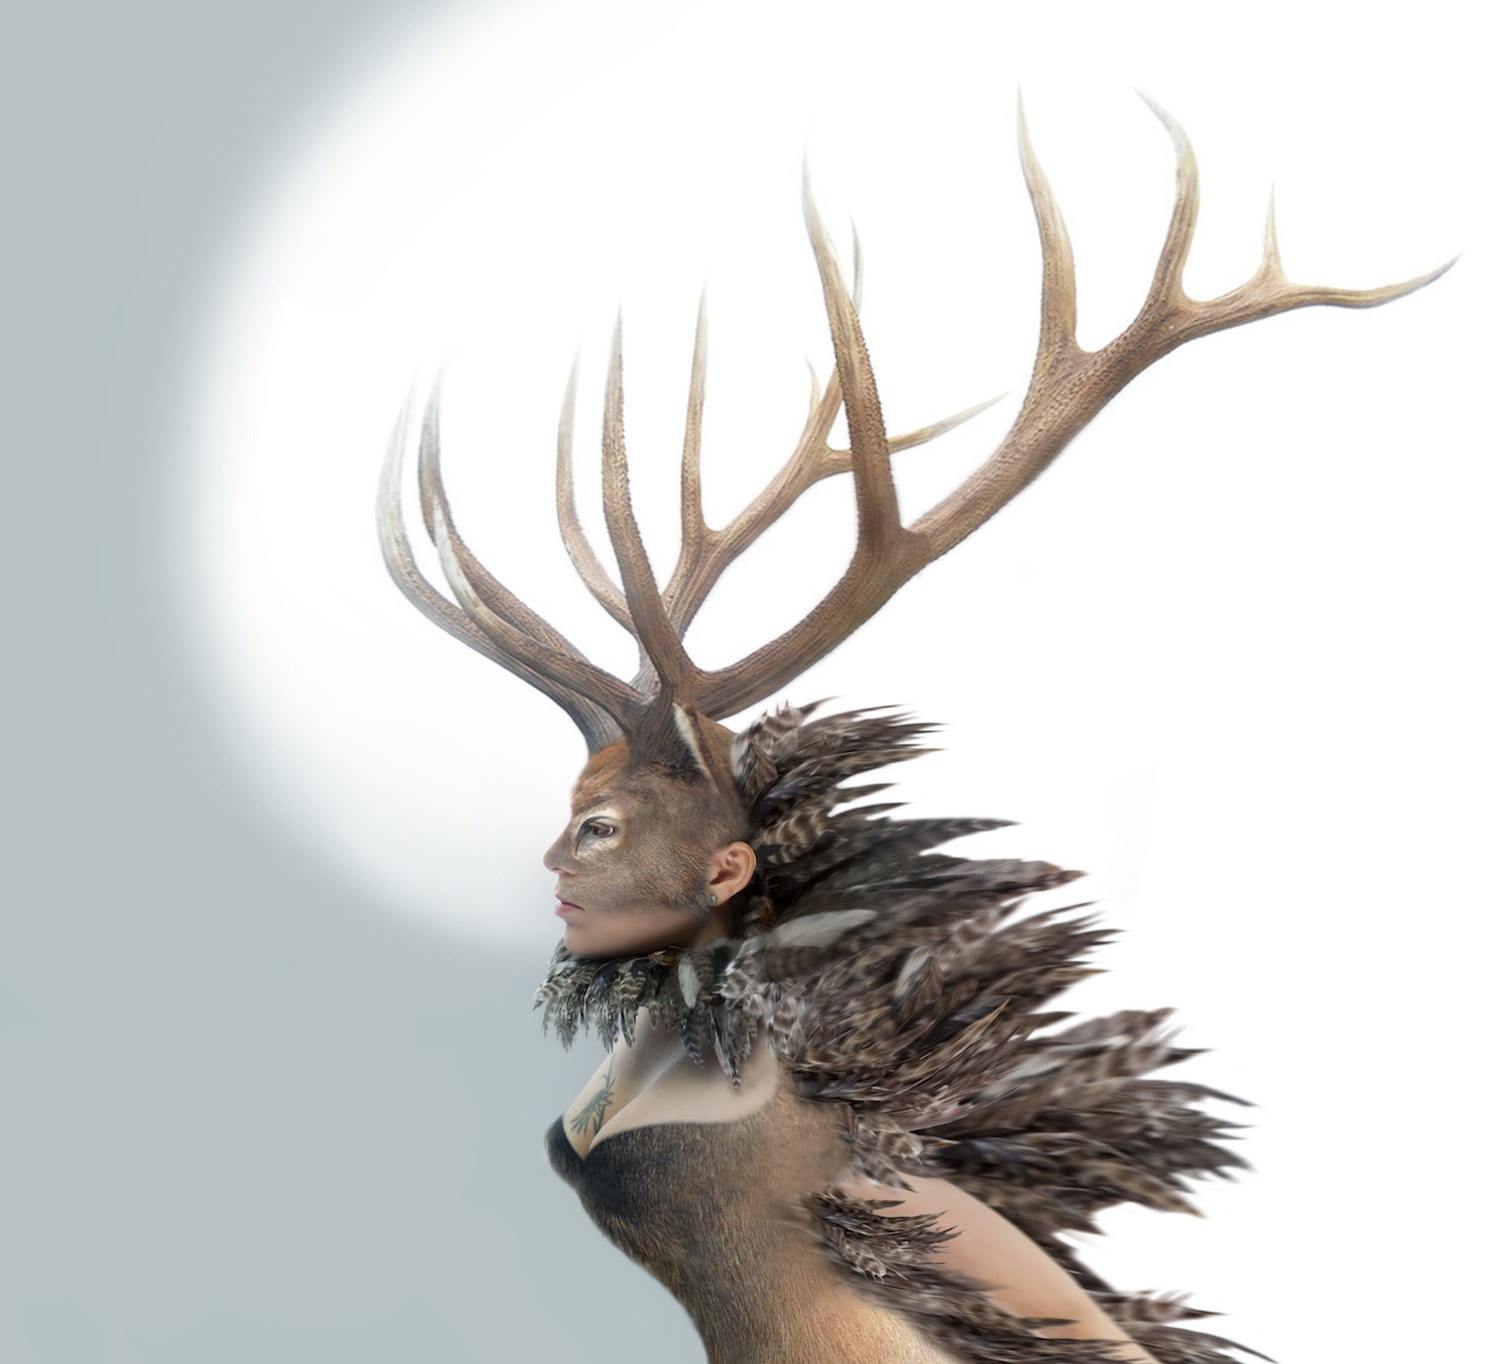 Tanya Tagaq: “It’s an issue having people coming and telling you how to live from so far away”